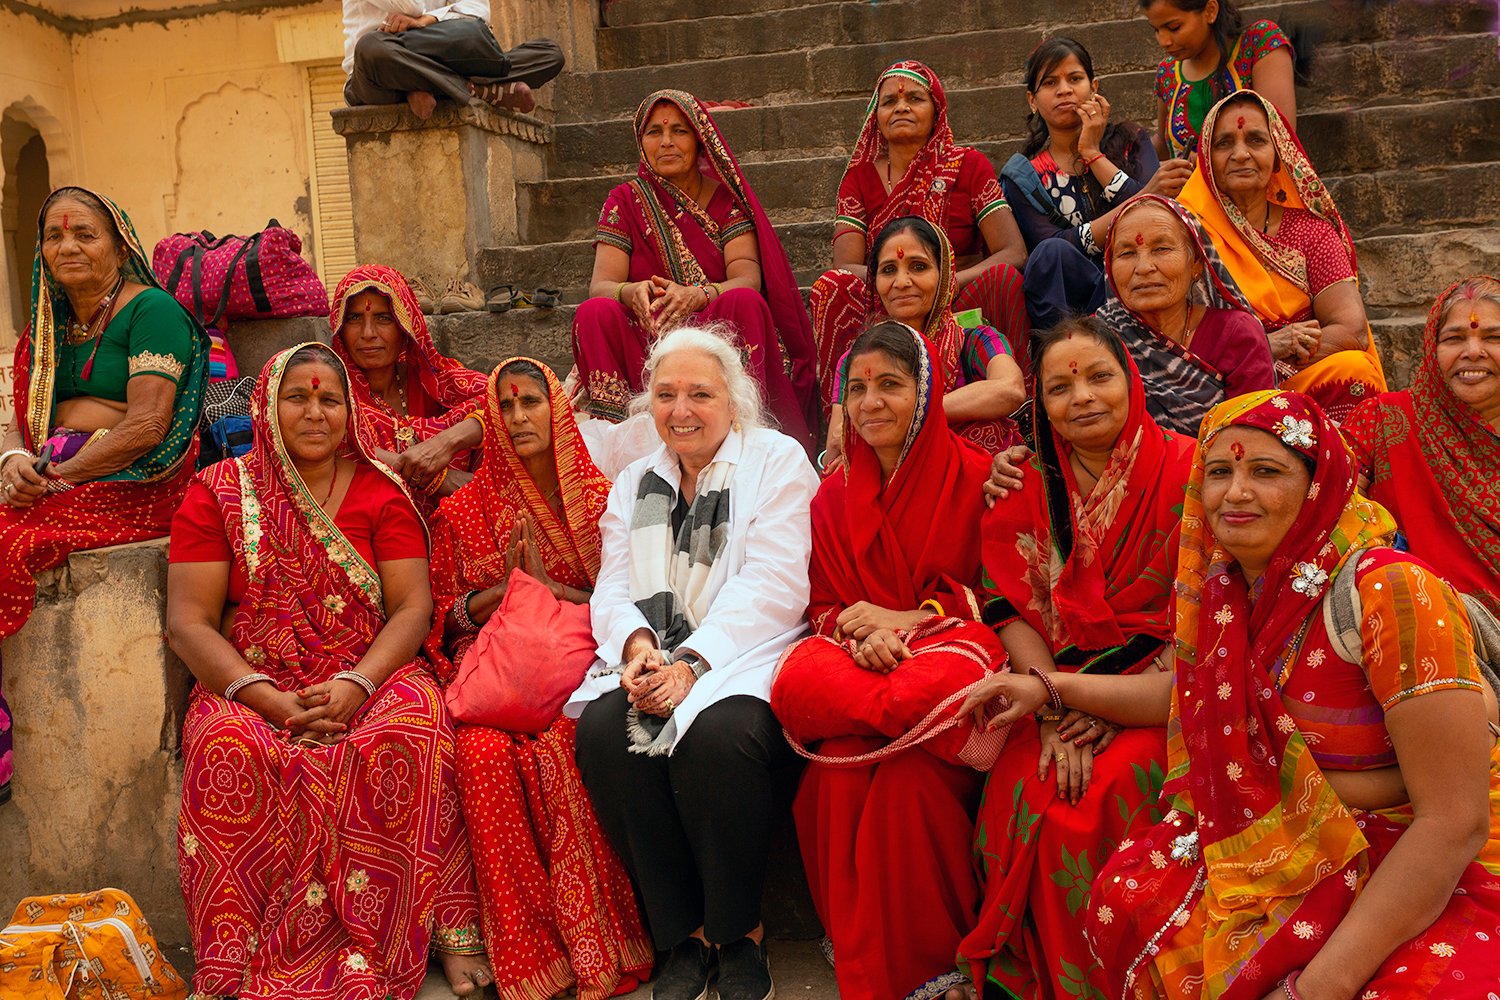 Claudia-Toutain-Dorbec-multimedia-artist-in-Rajasthan-India-with-a-group-of-women.jpg